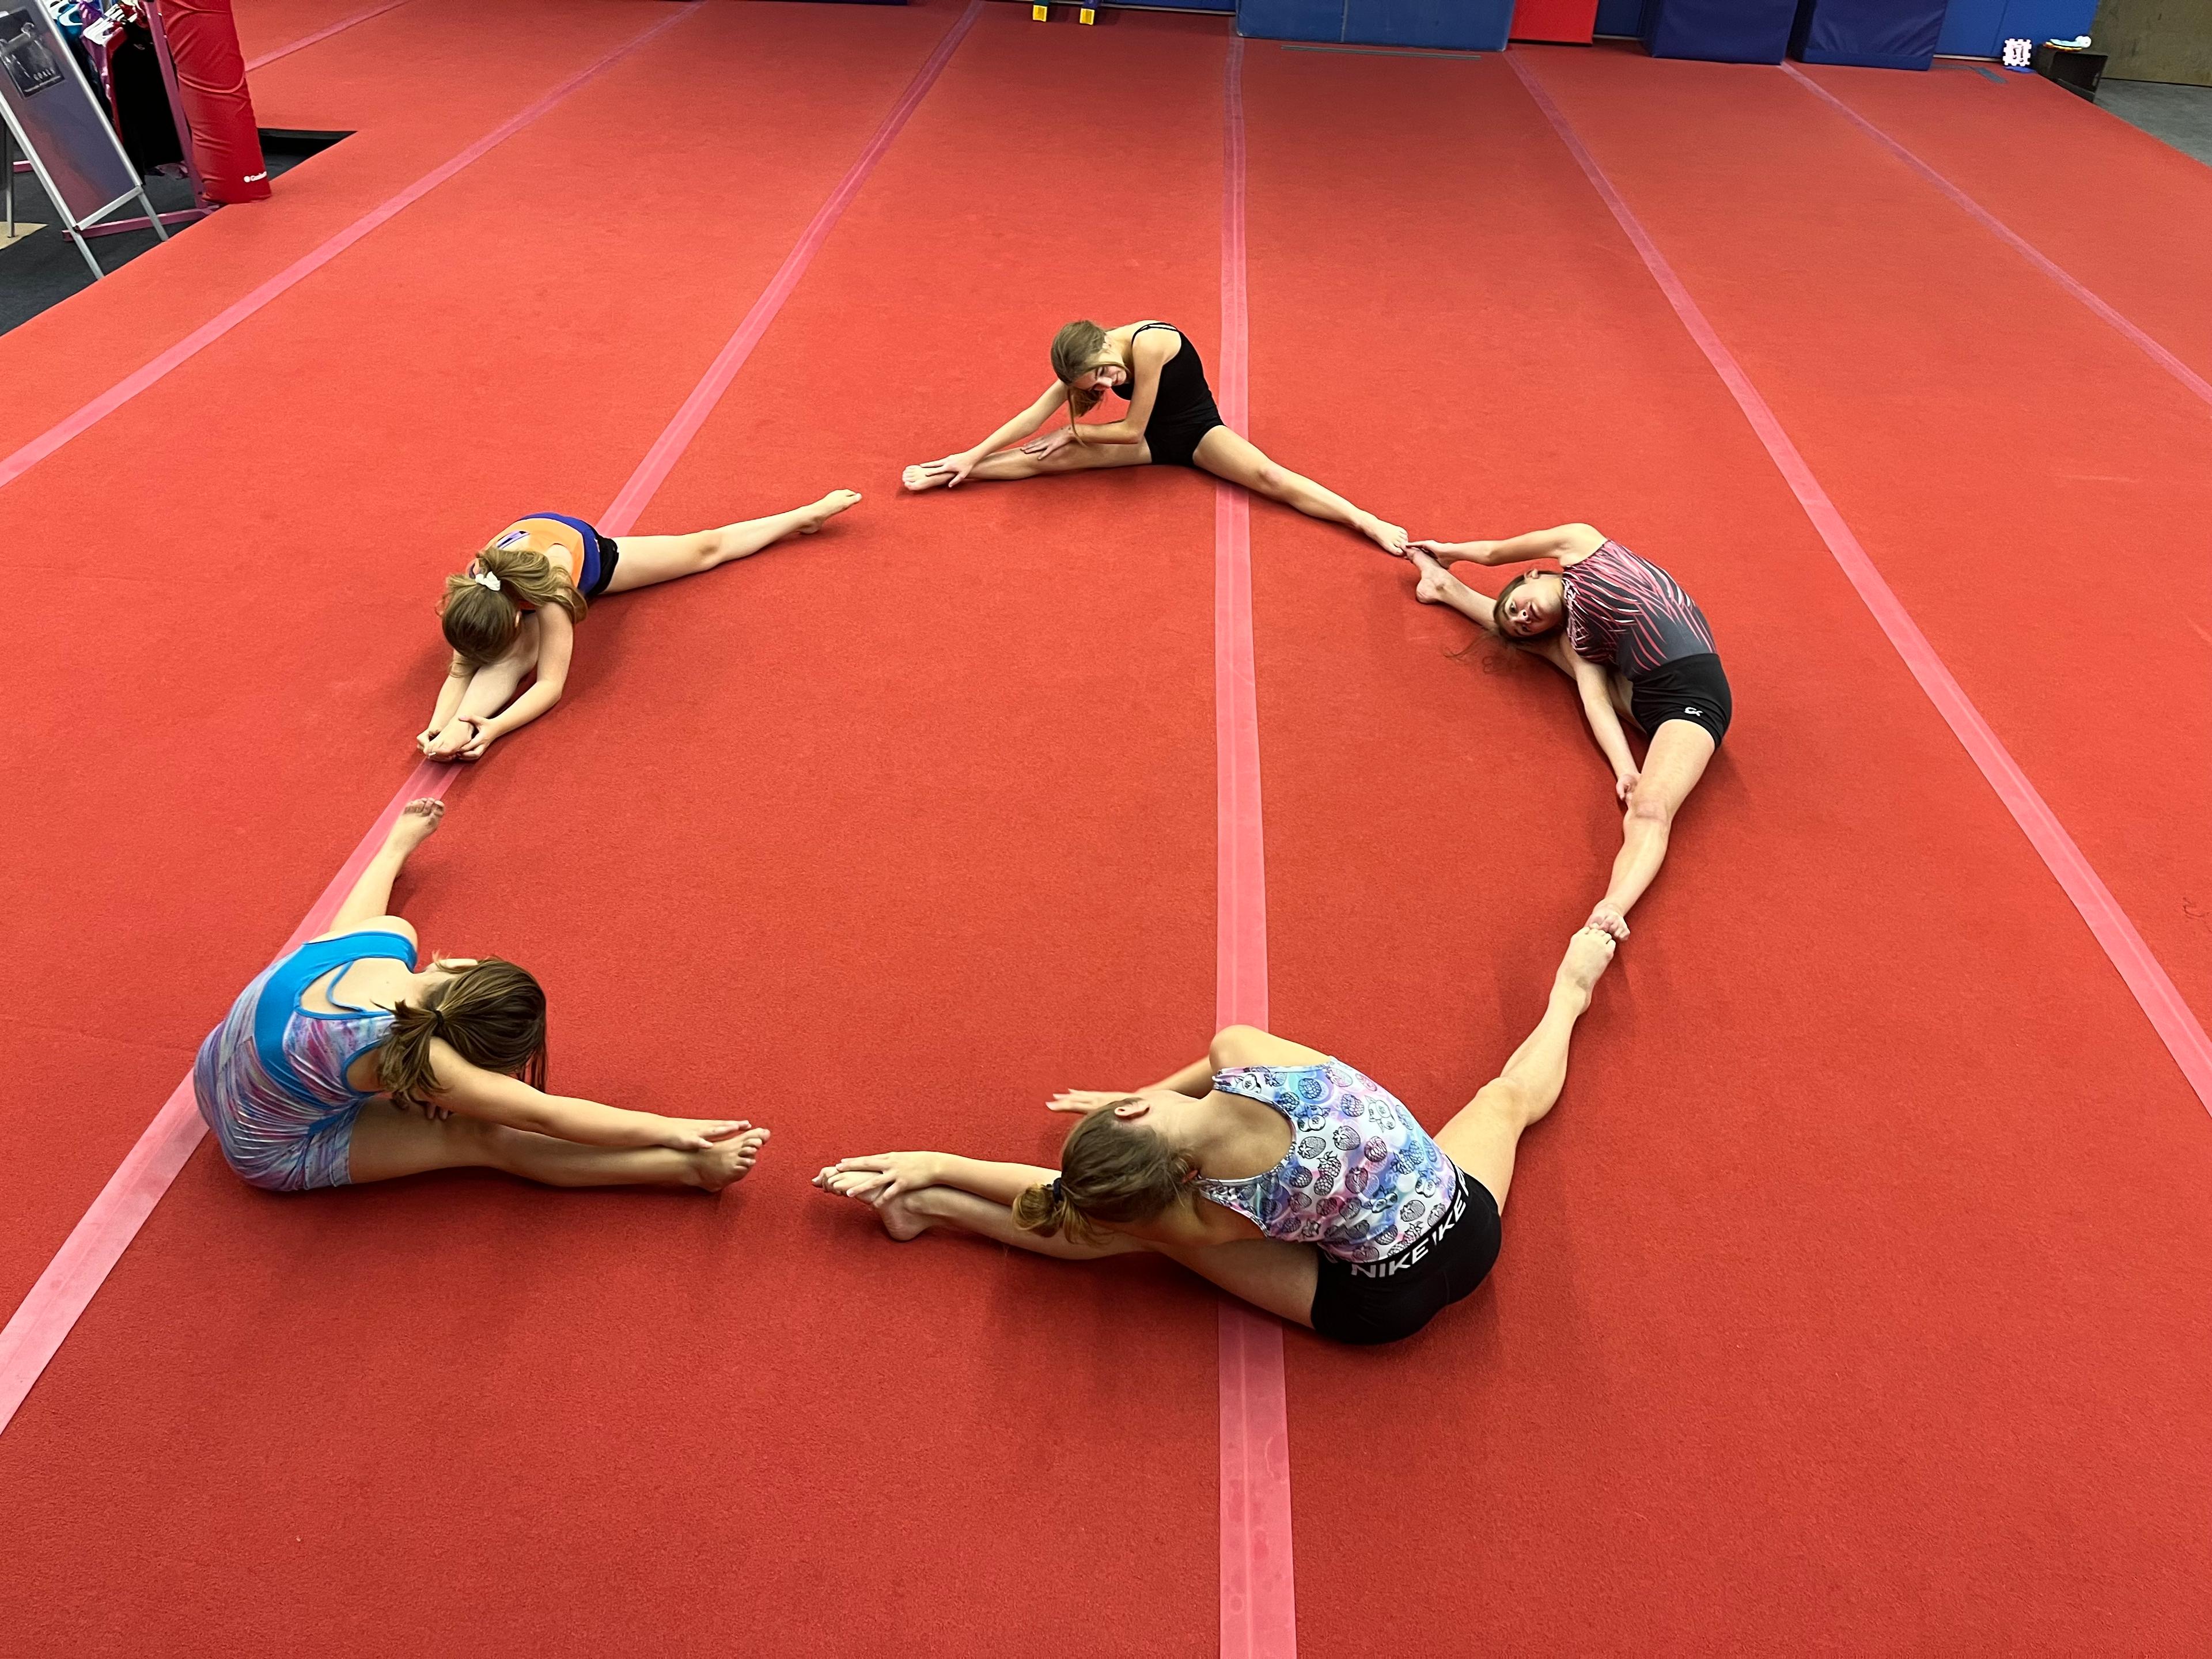 Gymnasts stretching on mat